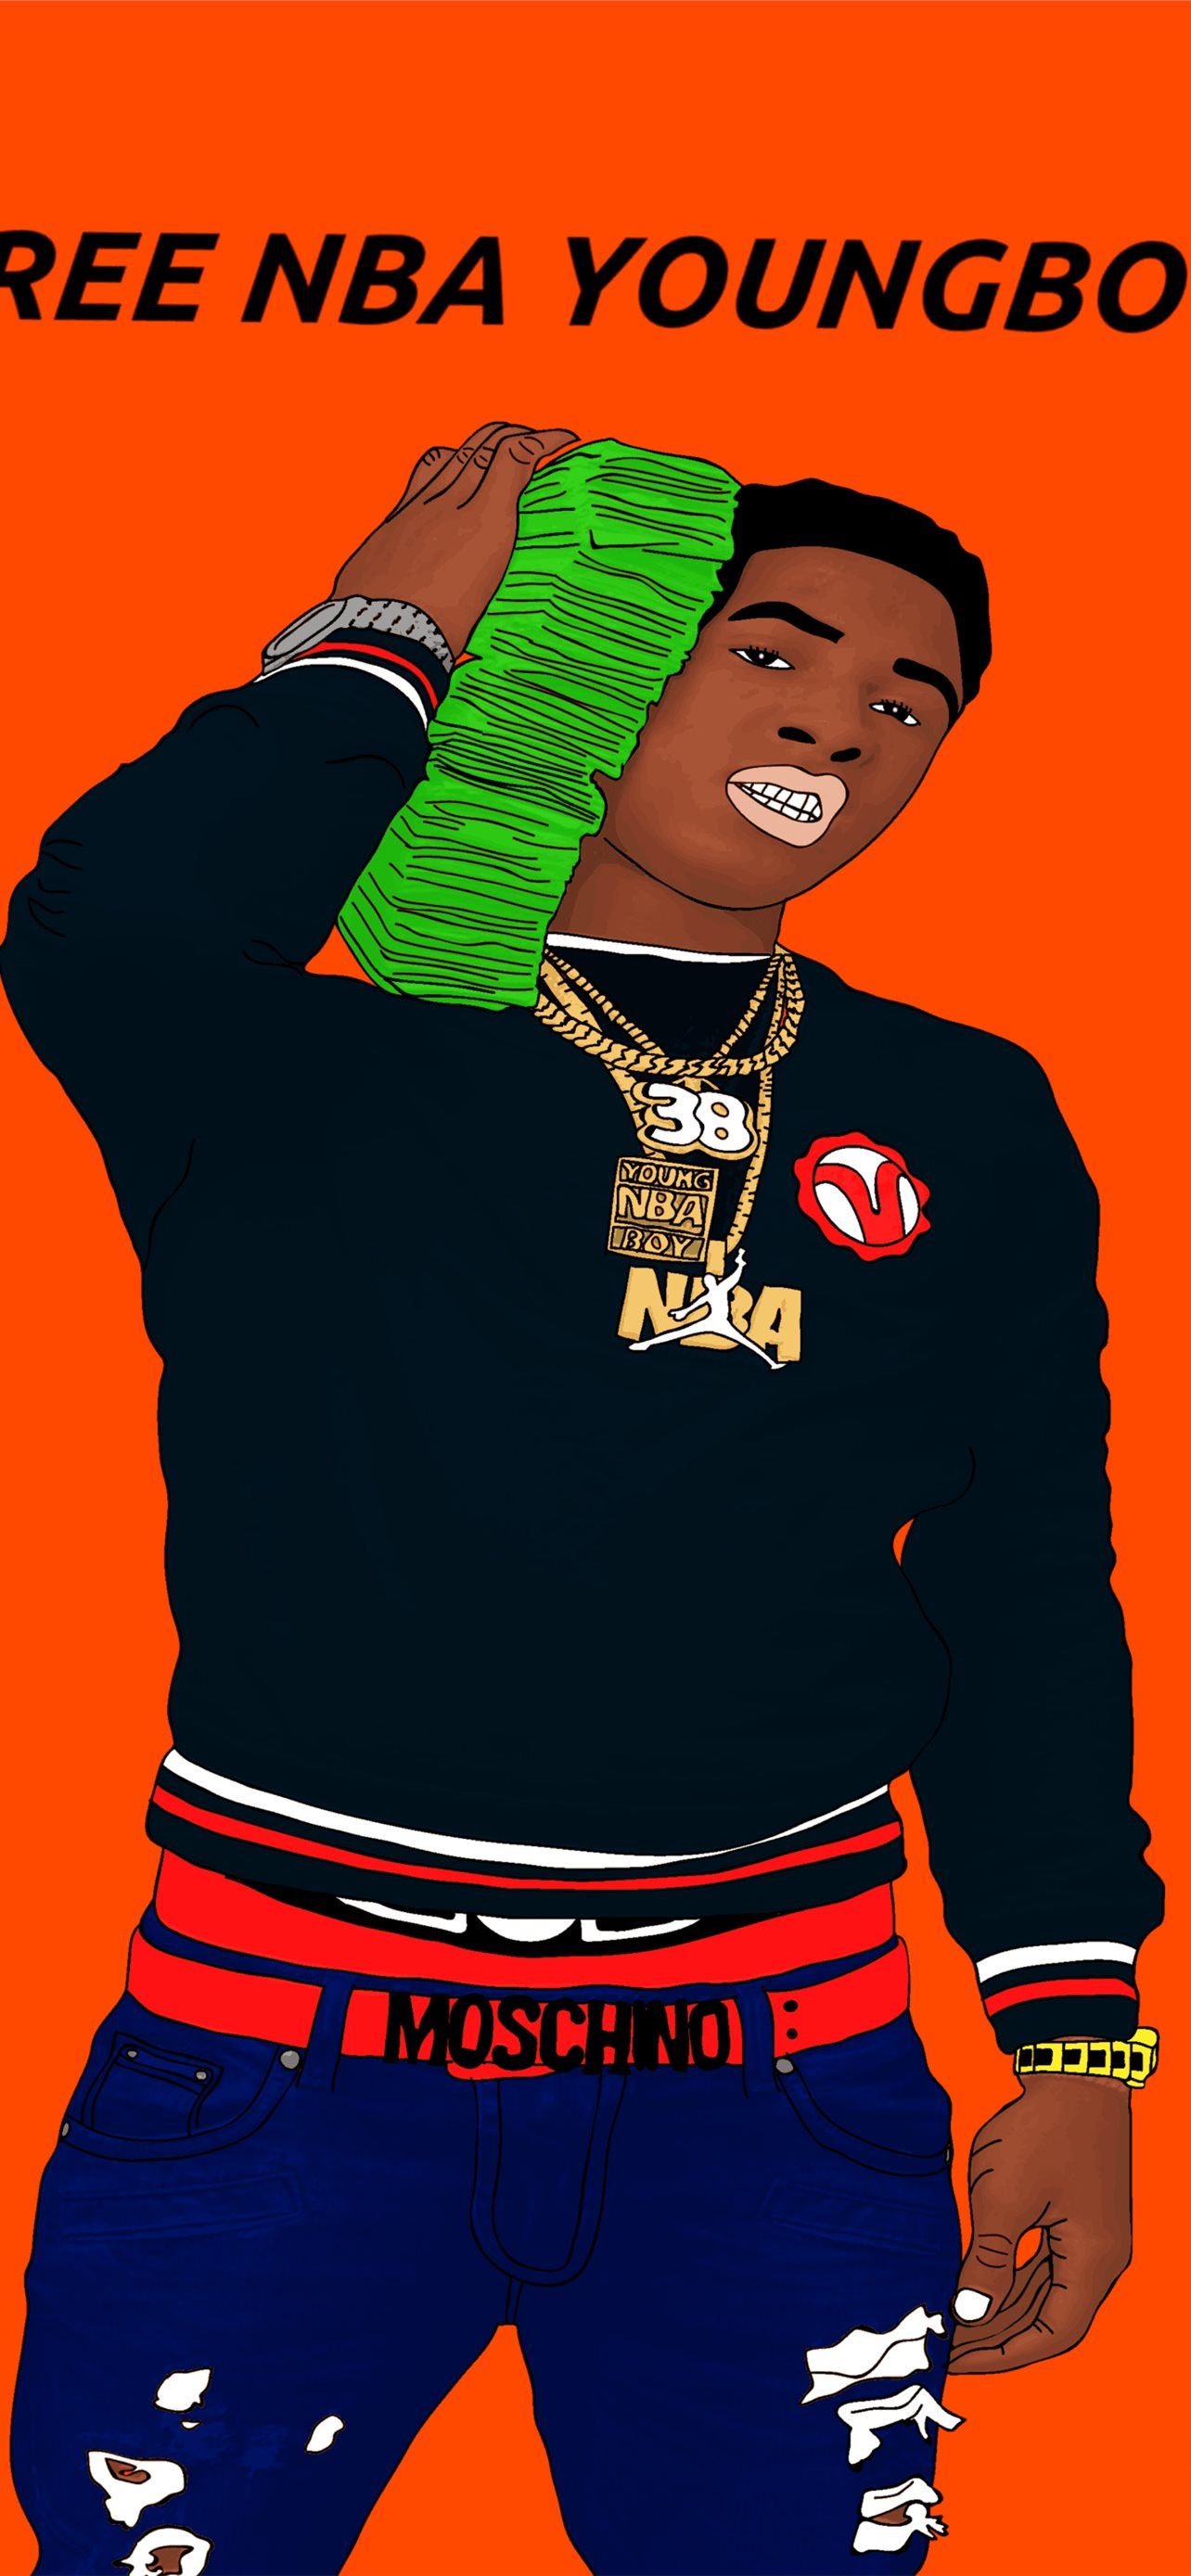 Backgrounds nba youngboy cartoon iphone wallpapers free download